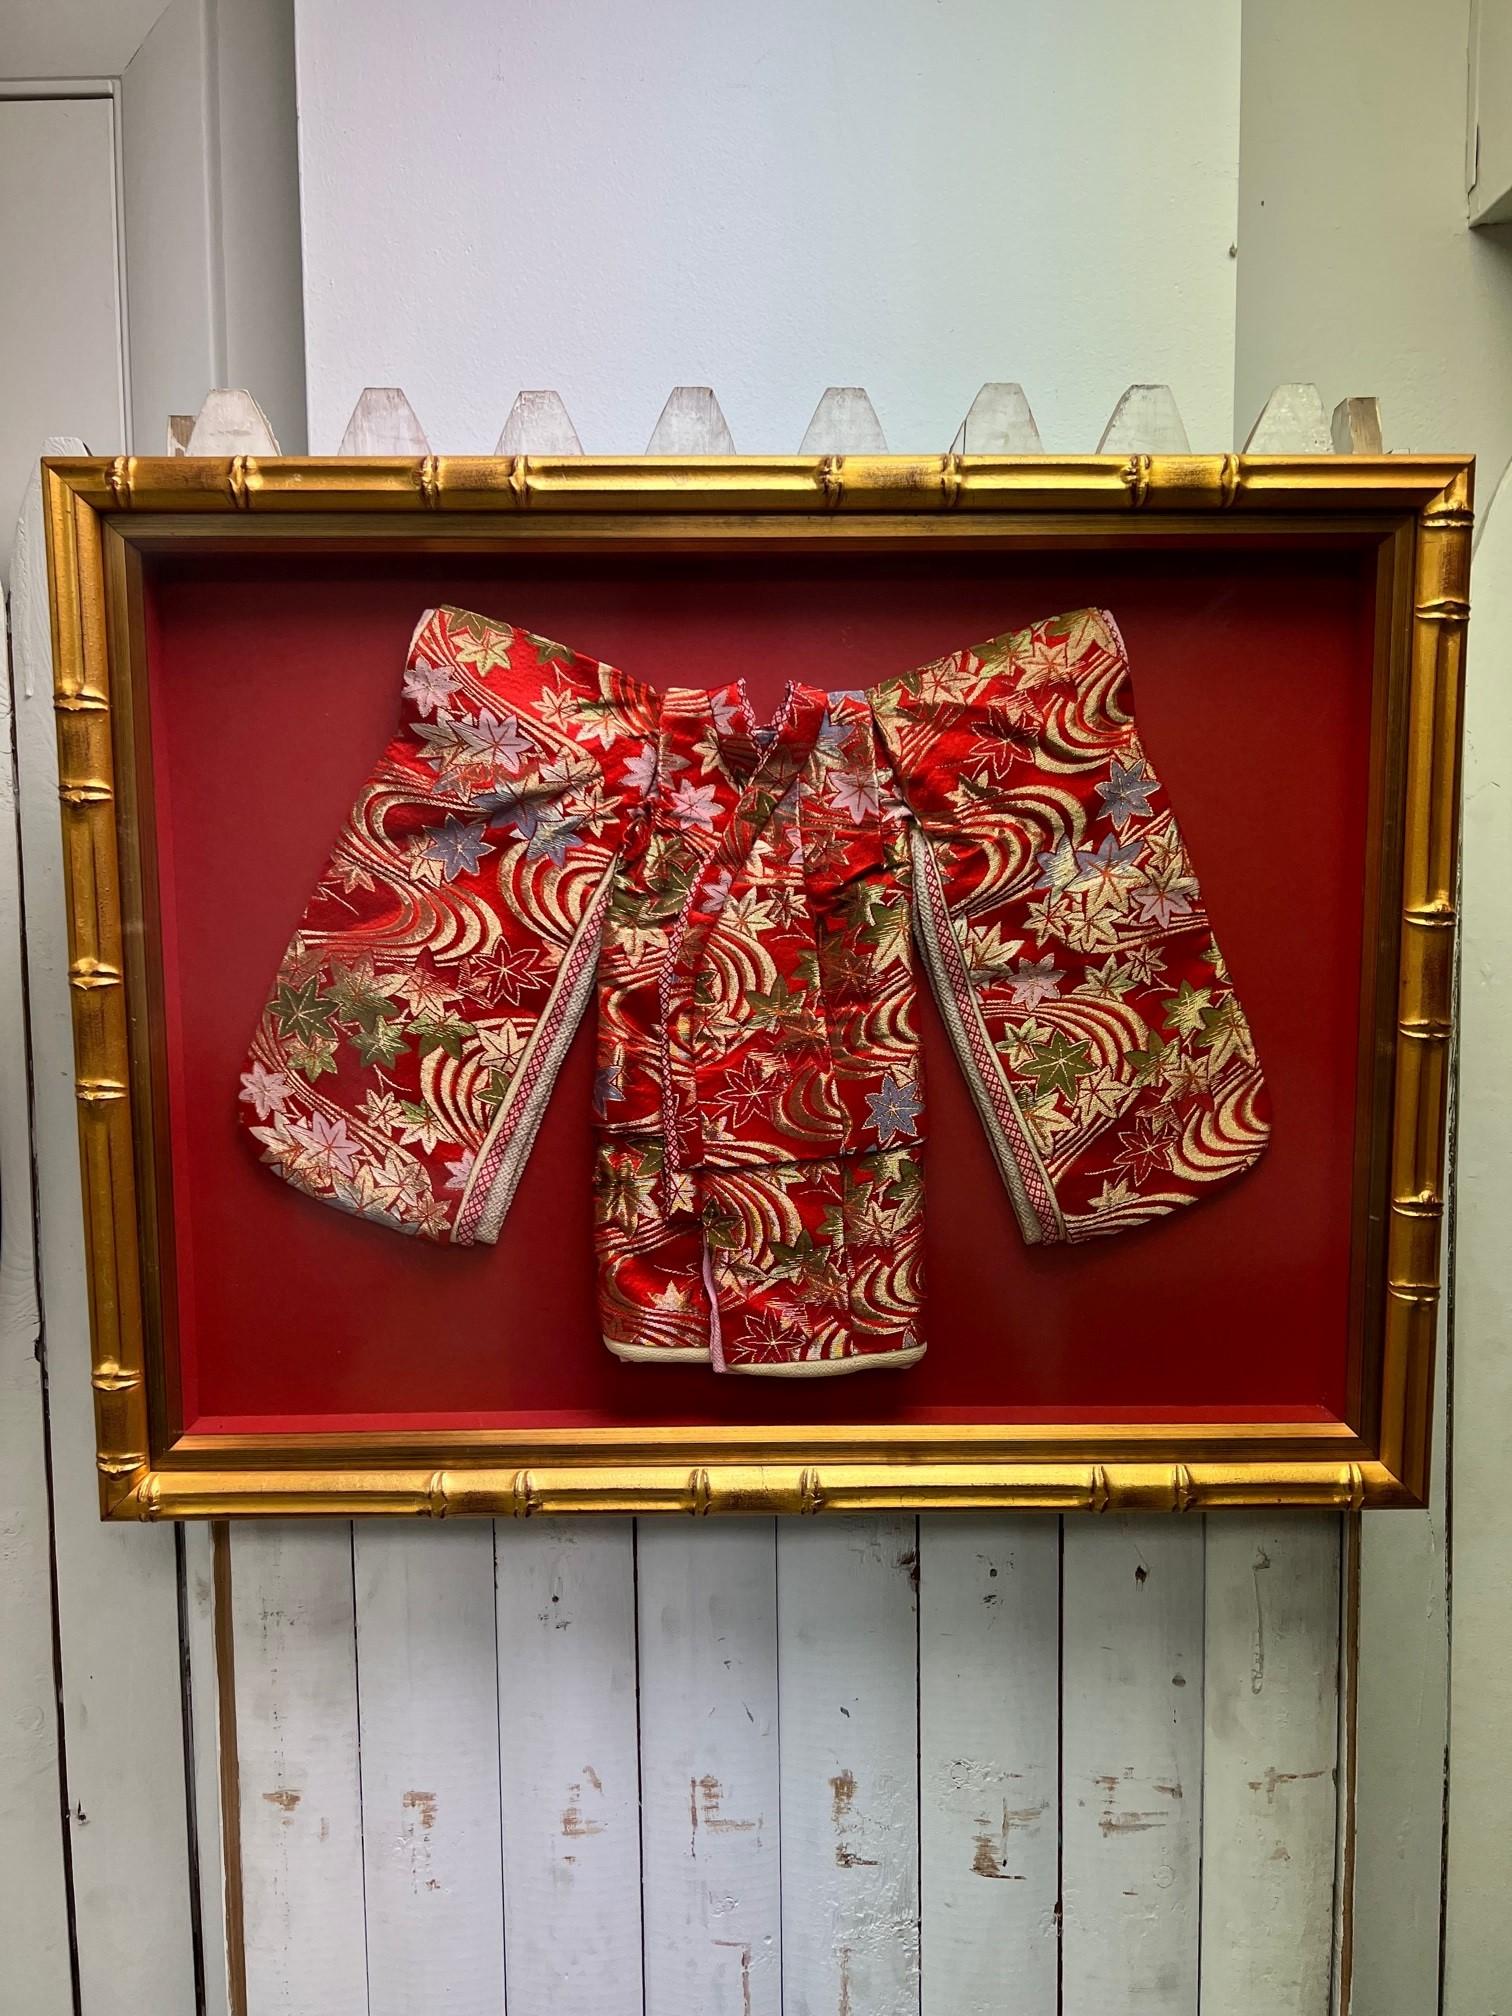 Beautiful rare vintage hand sewn one of a kind Japanese ceremonial child's kimono in a gold bamboo framed shadowbox. Kimono for children are shaped and styled much like those for adults, but are almost always in bright patterns and prints. This is a